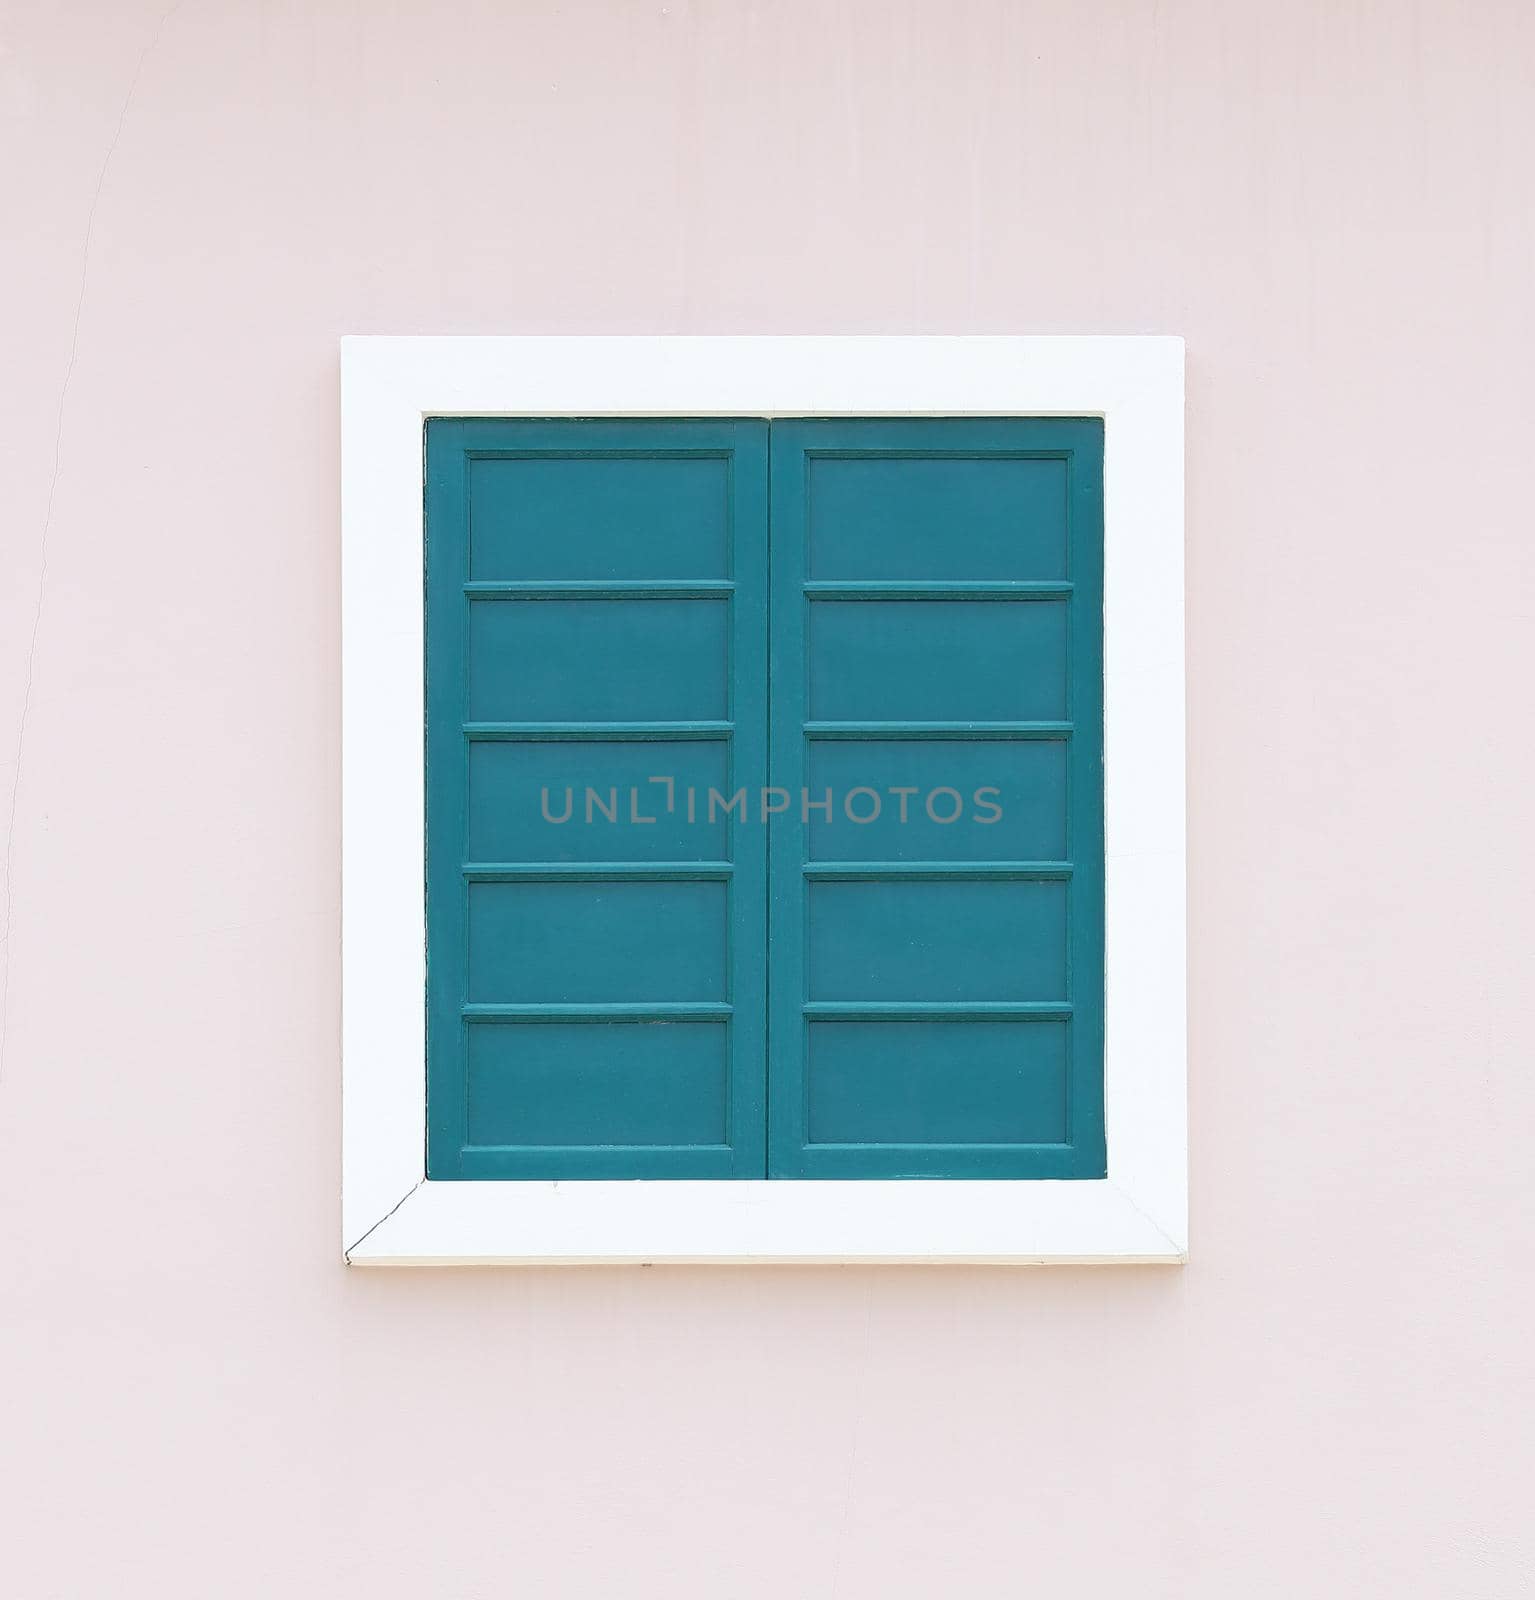 Vintage window with wall background (Venice or Italian style)